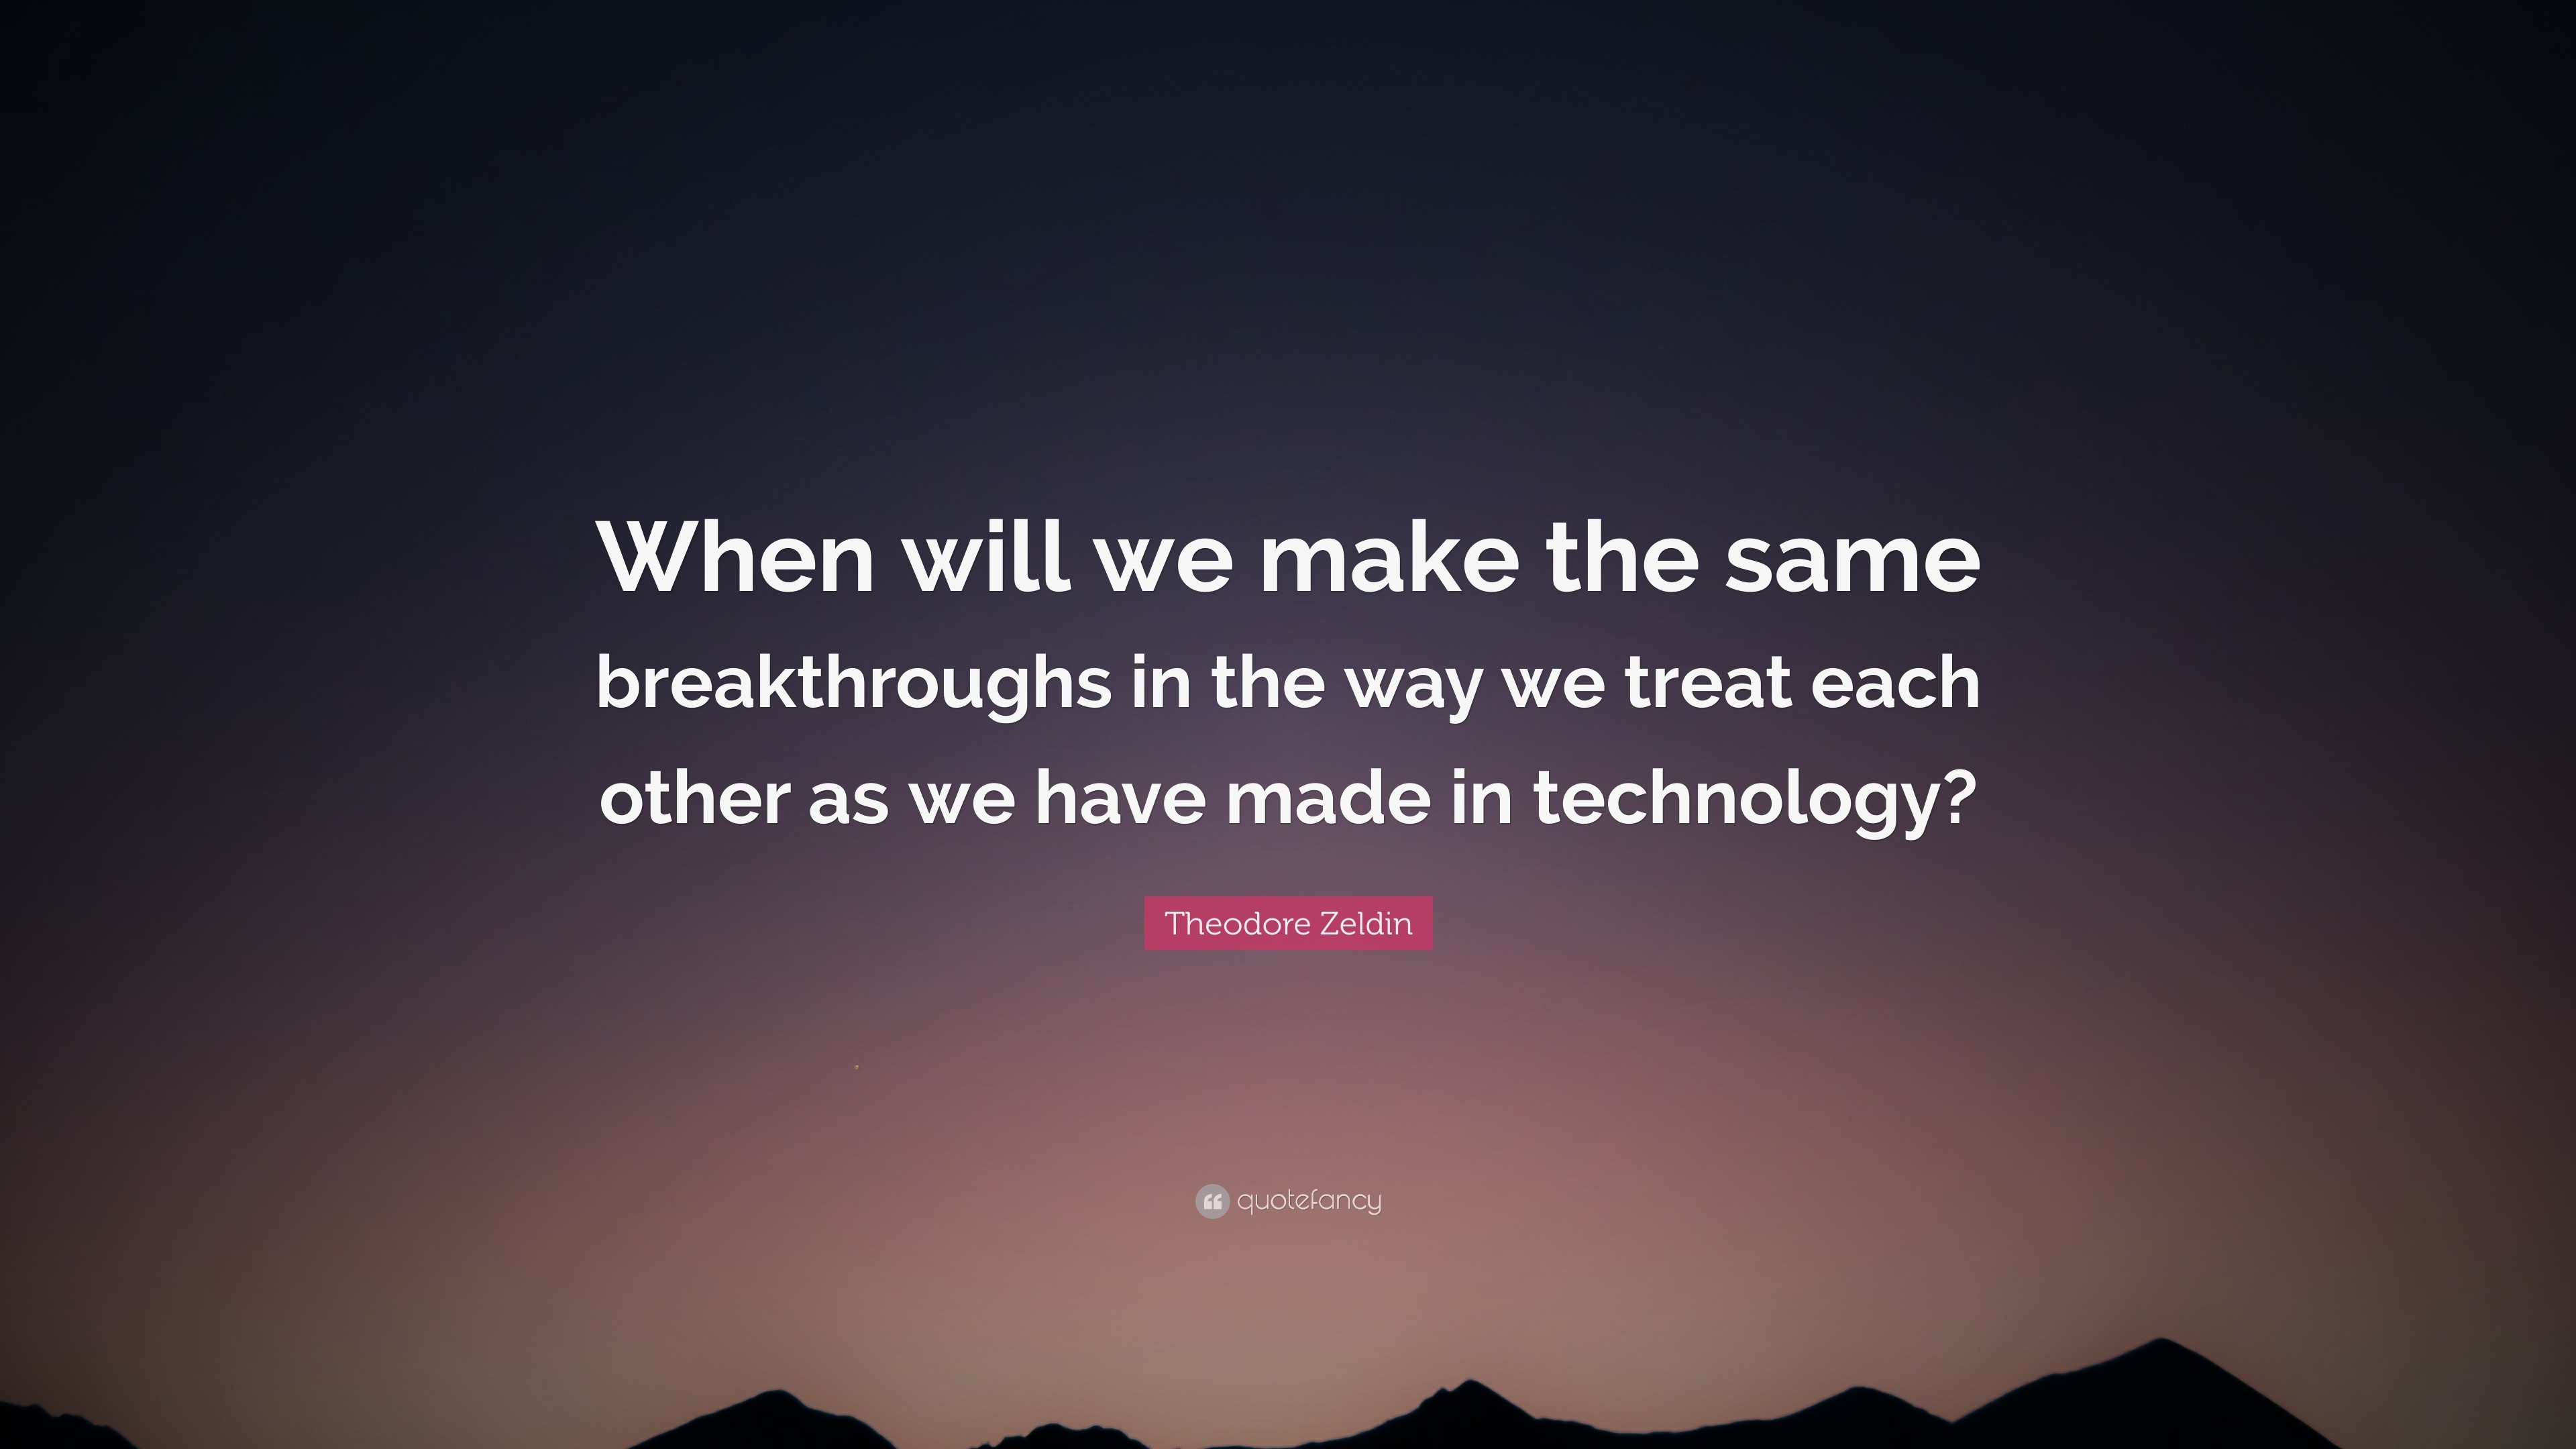 Theodore Zeldin Quote: “When will we make the same breakthroughs in the ...